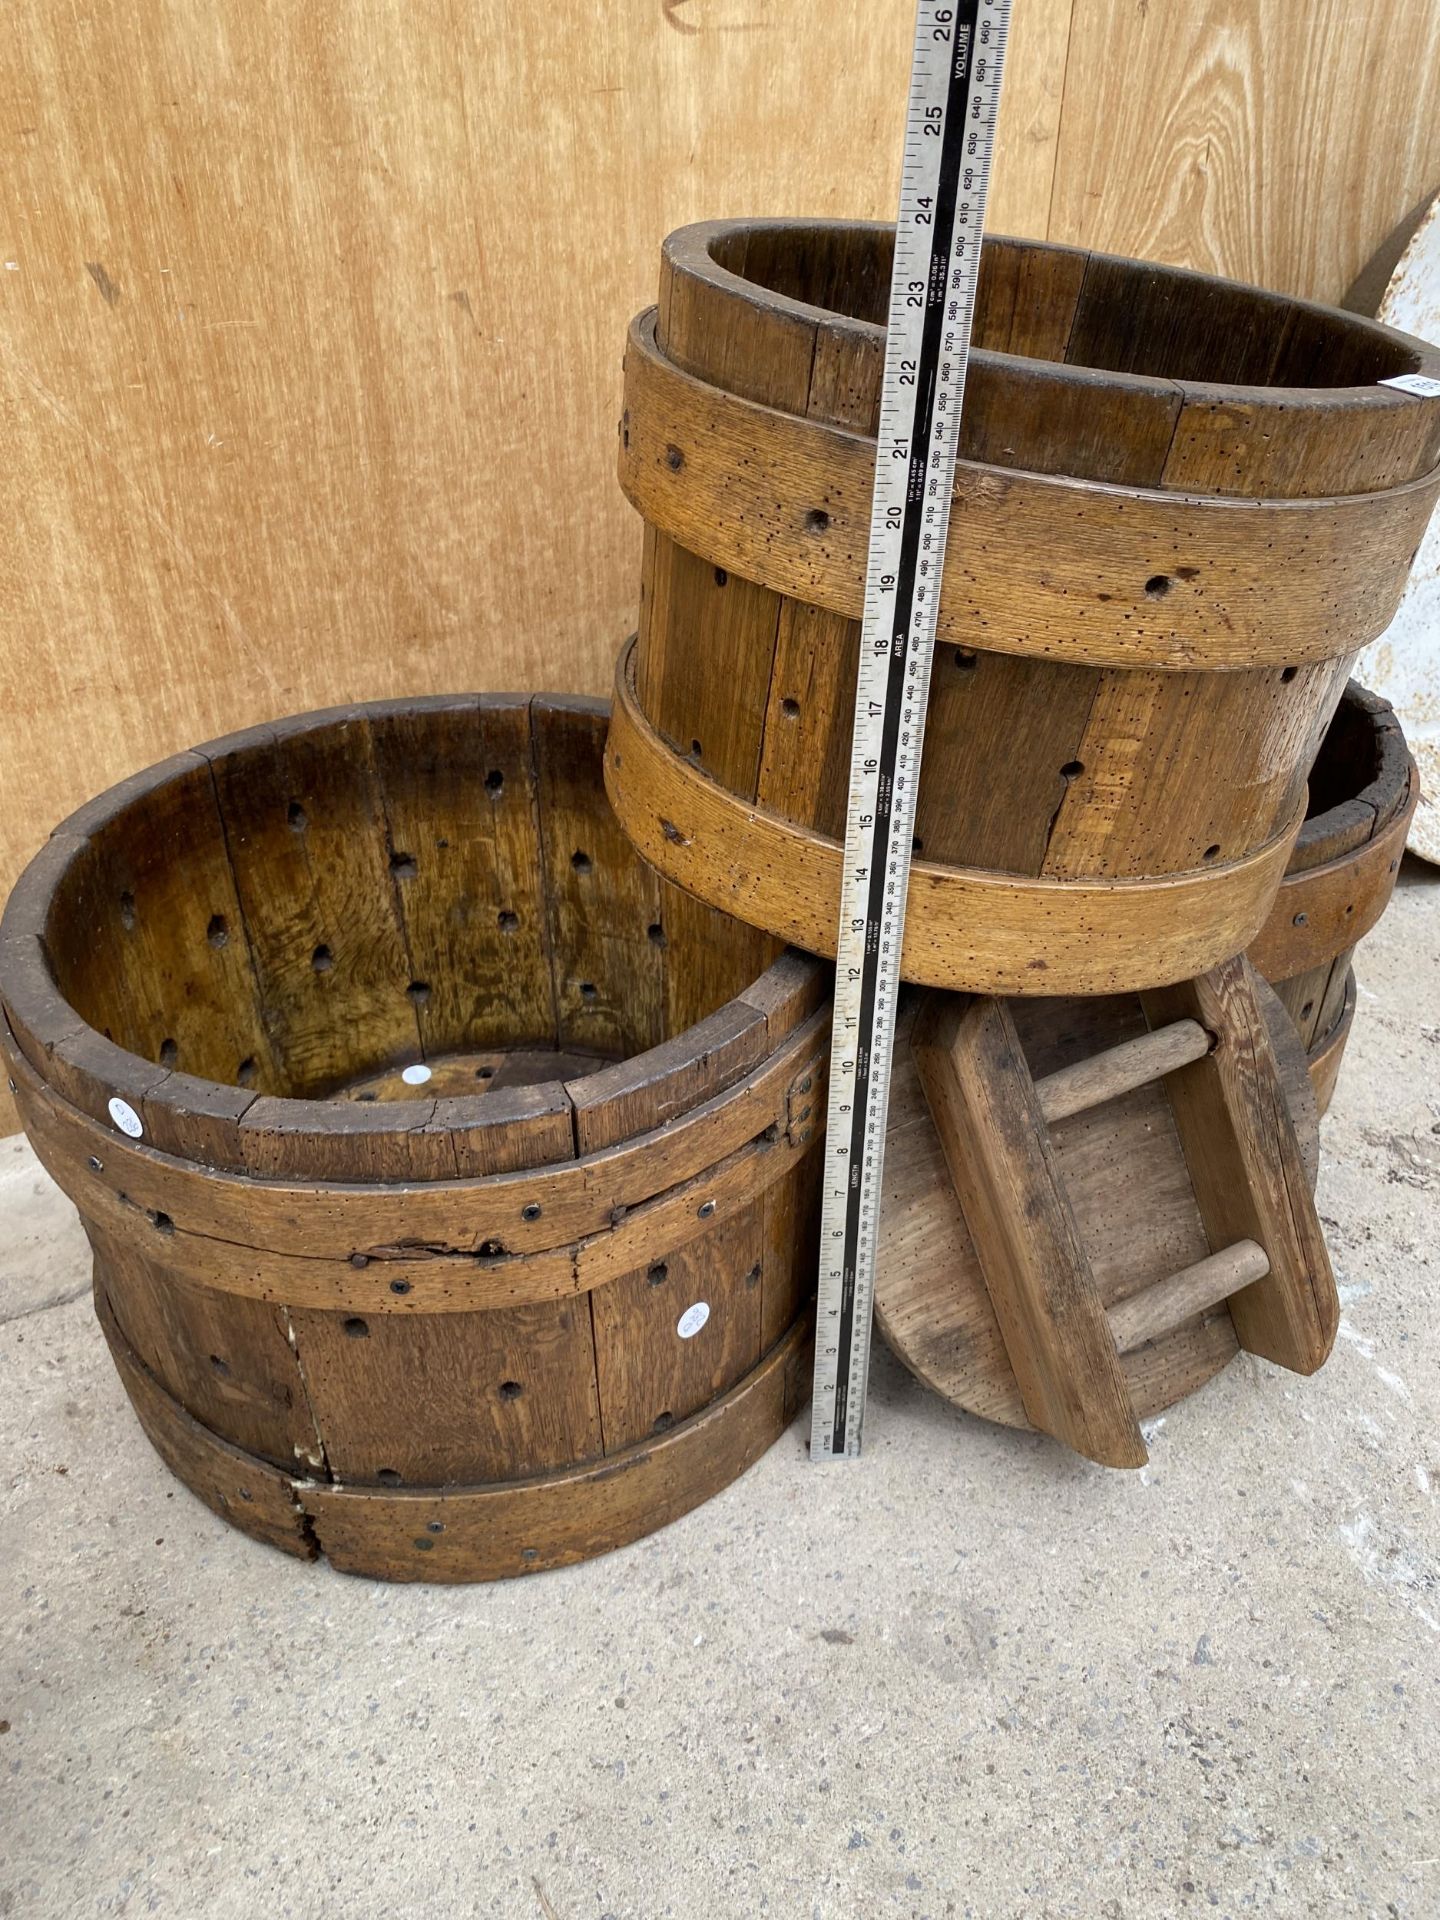 THREE VINTAGE WOODEN CHEESE VAT PRESSES - Image 2 of 4